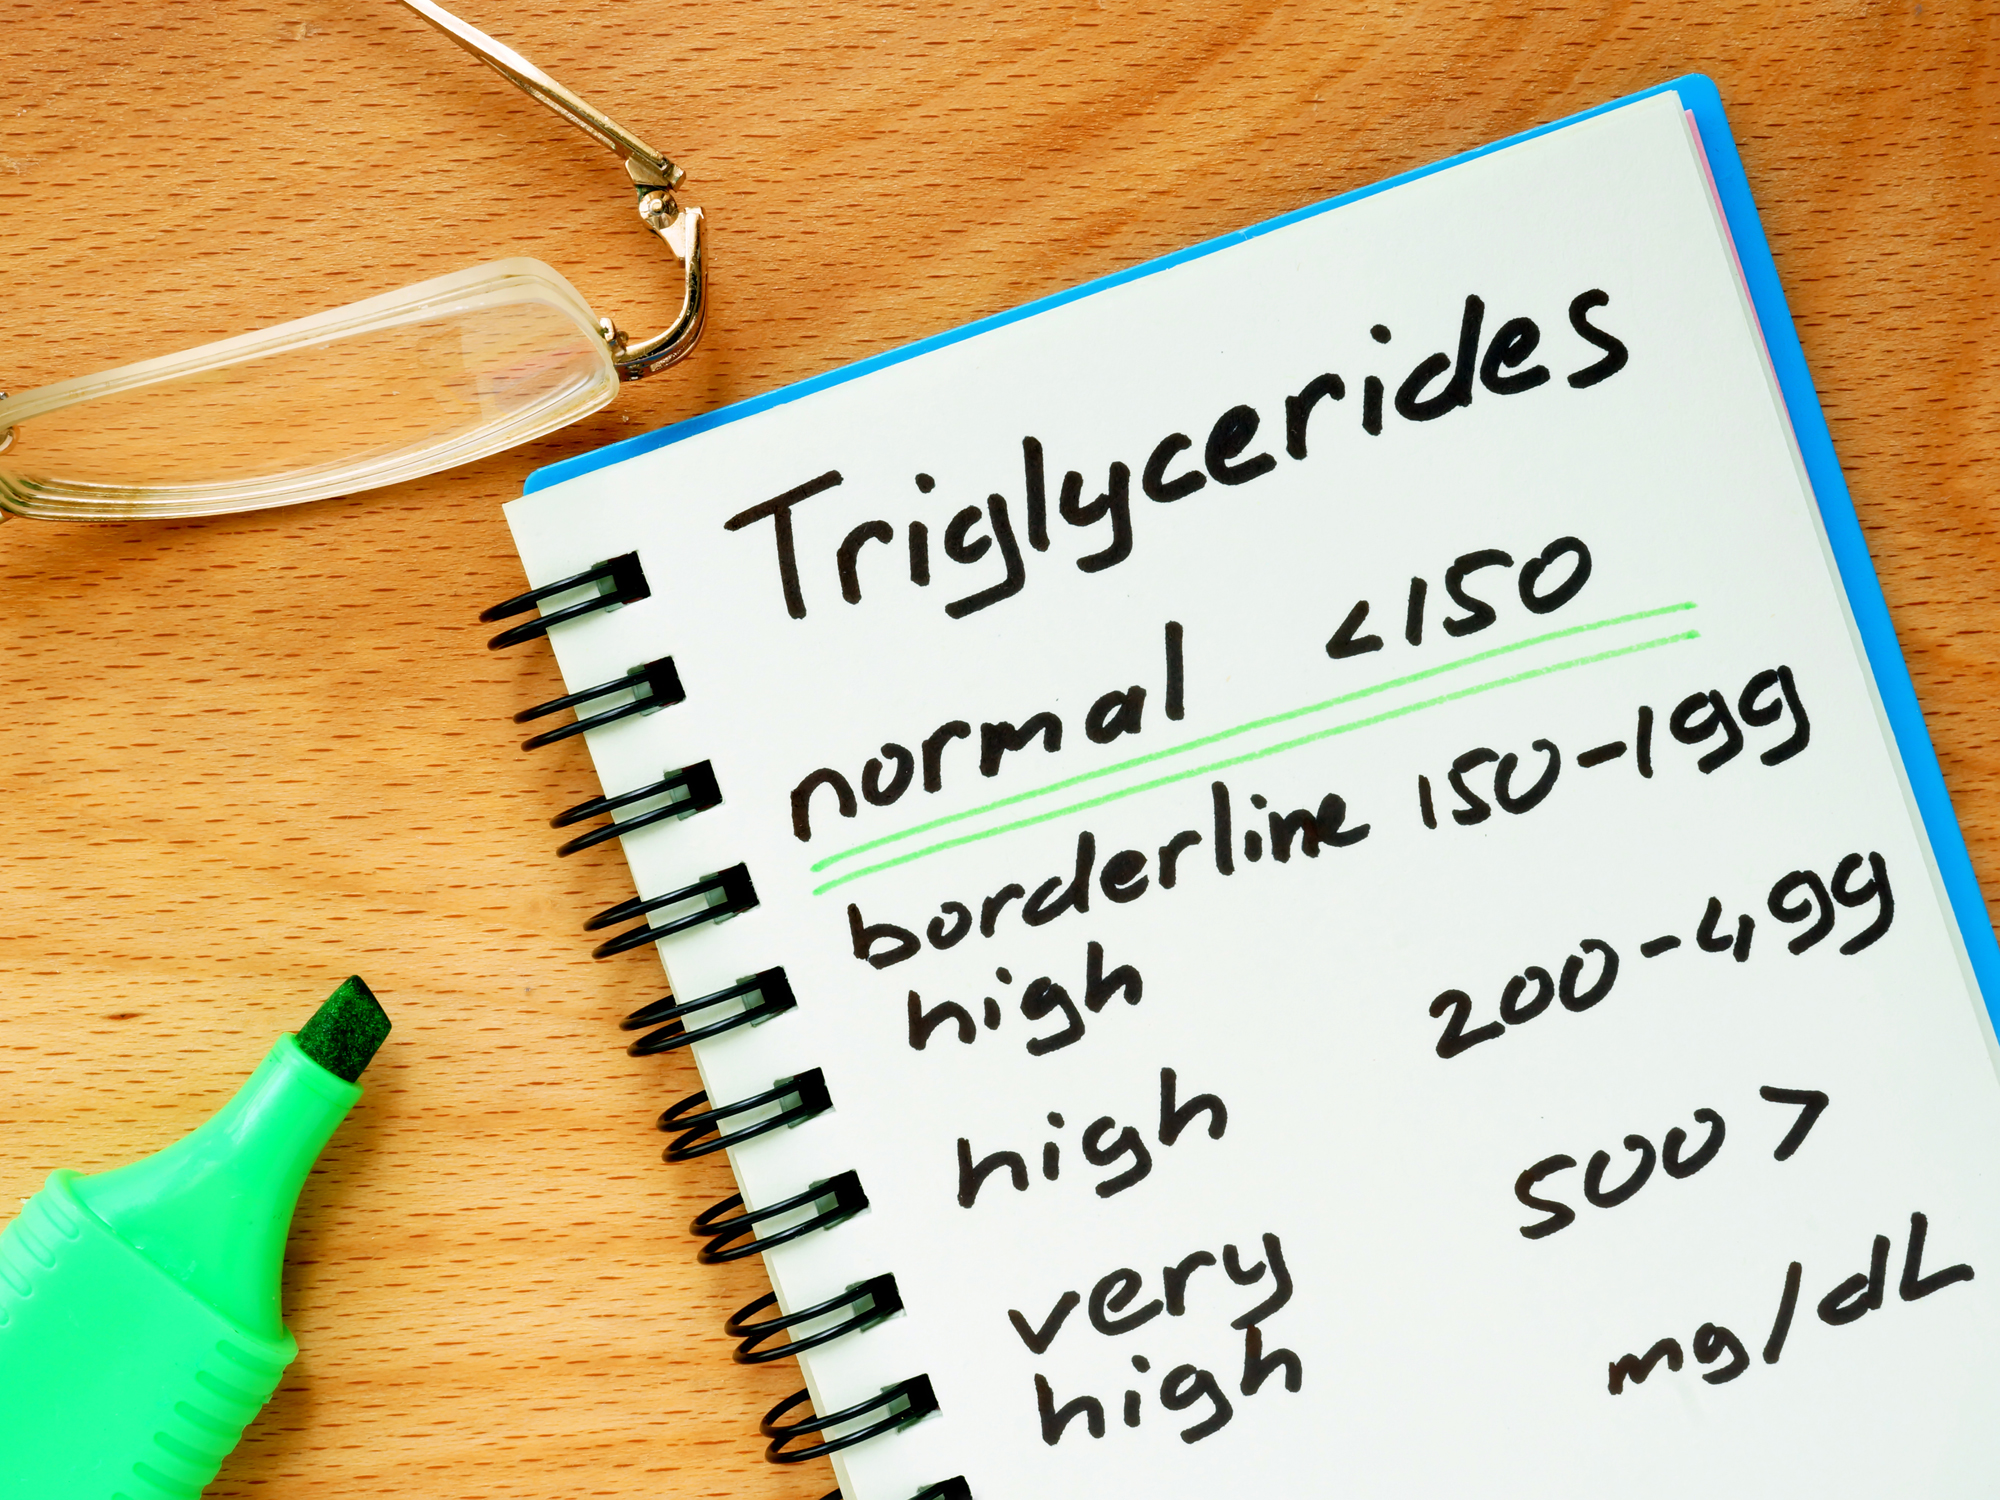 The truth about those triglycerides